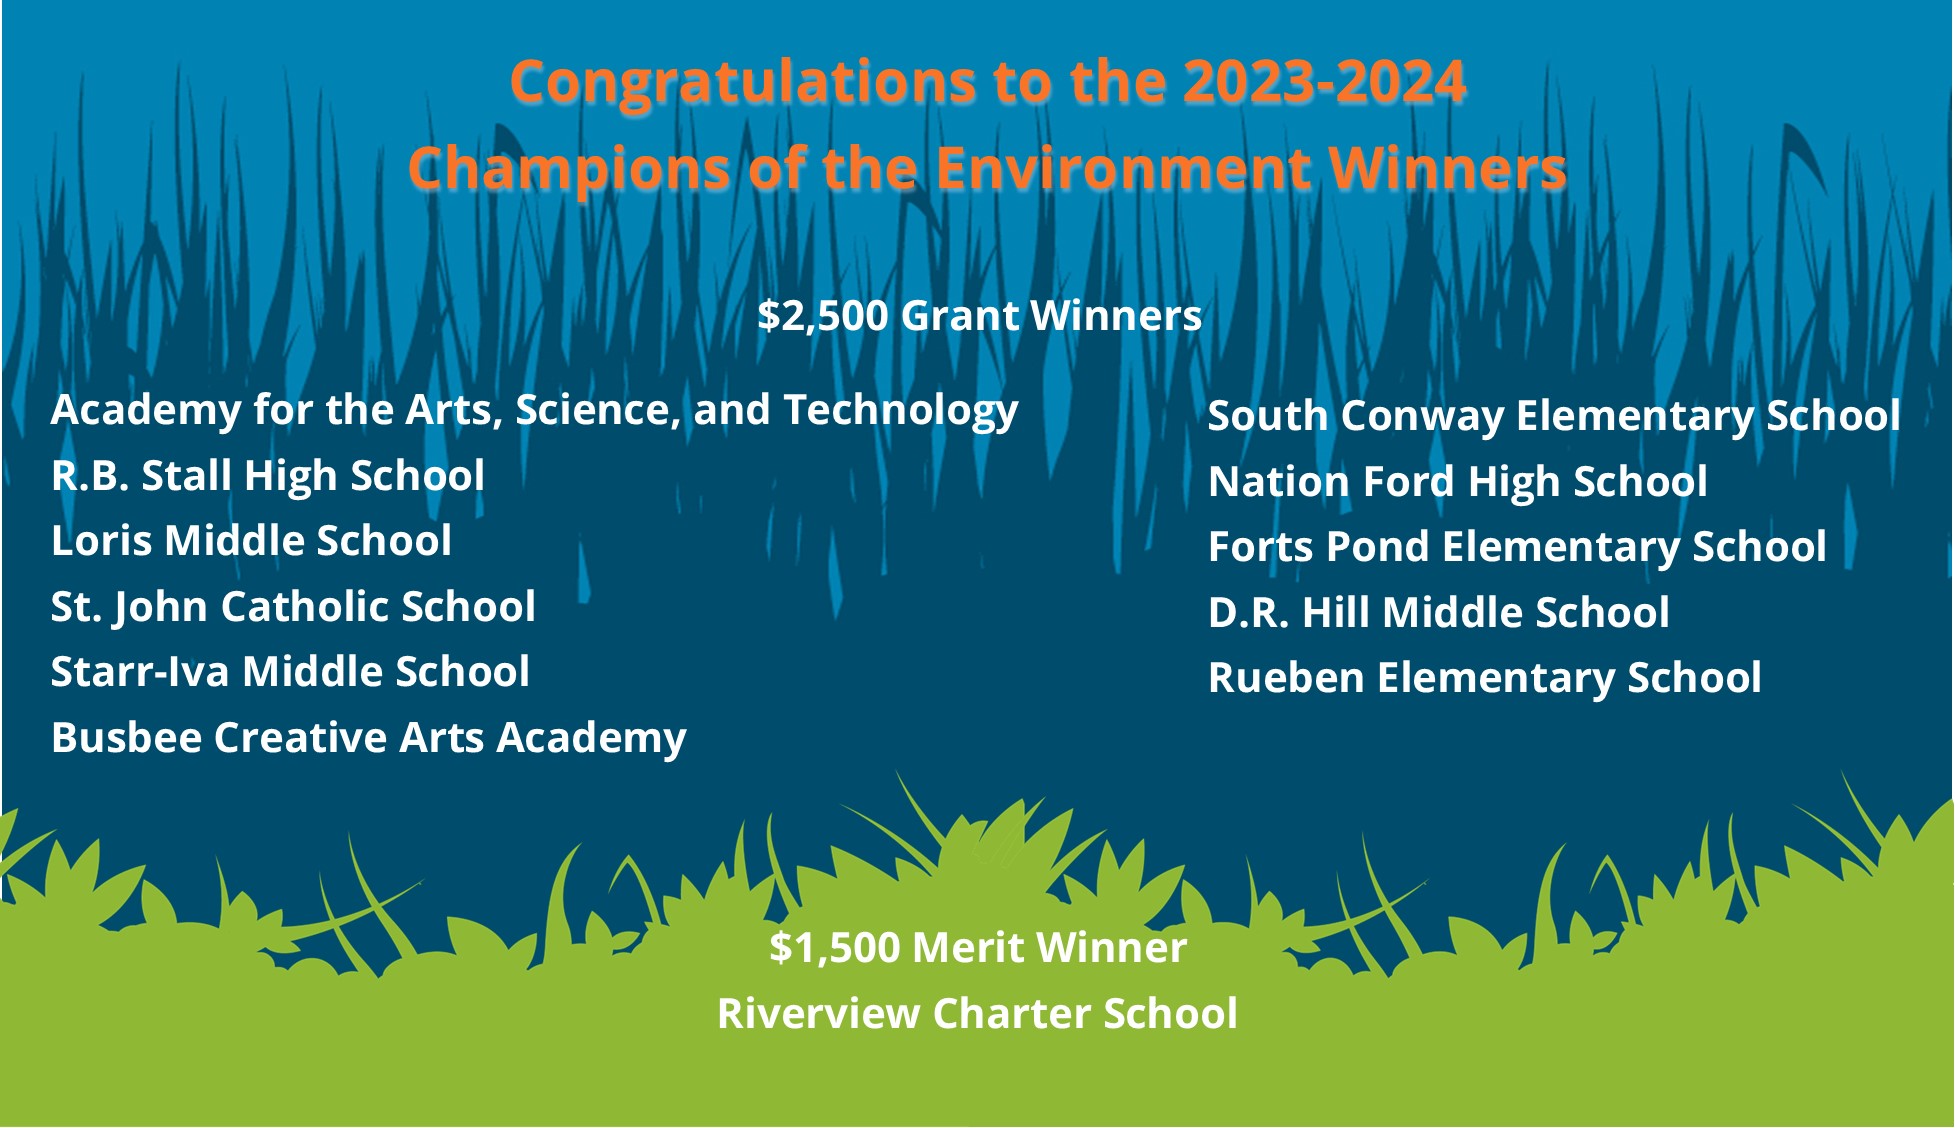 2023-2024 Champions of the Environment Winners